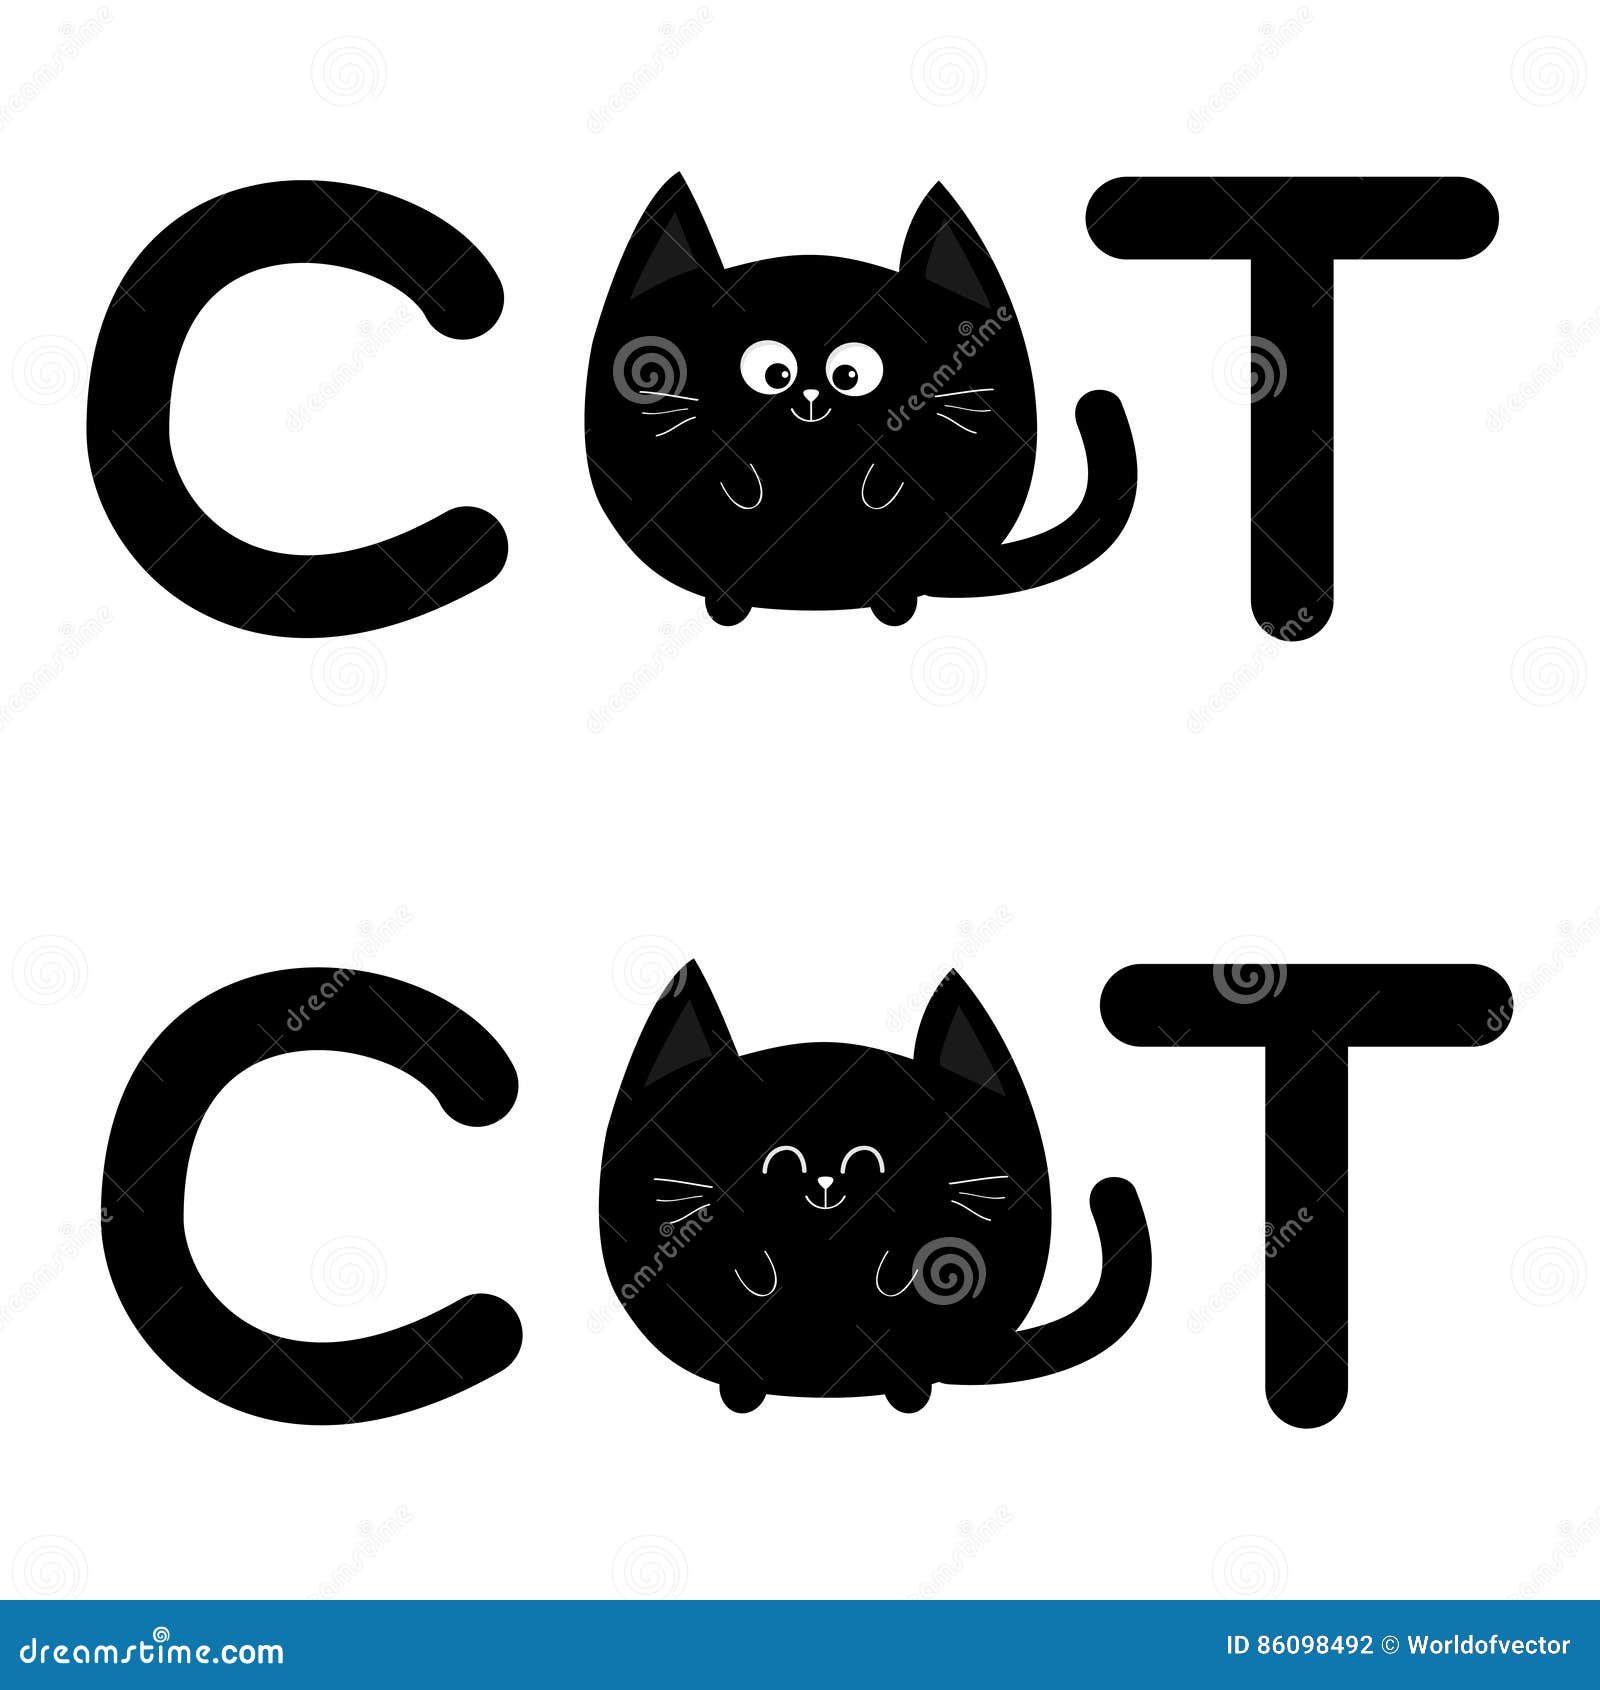 round  black cat text icon set. lettering. cute cartoon character. kawaii animal. big tail, whisker, eyes. happy emotion. kit